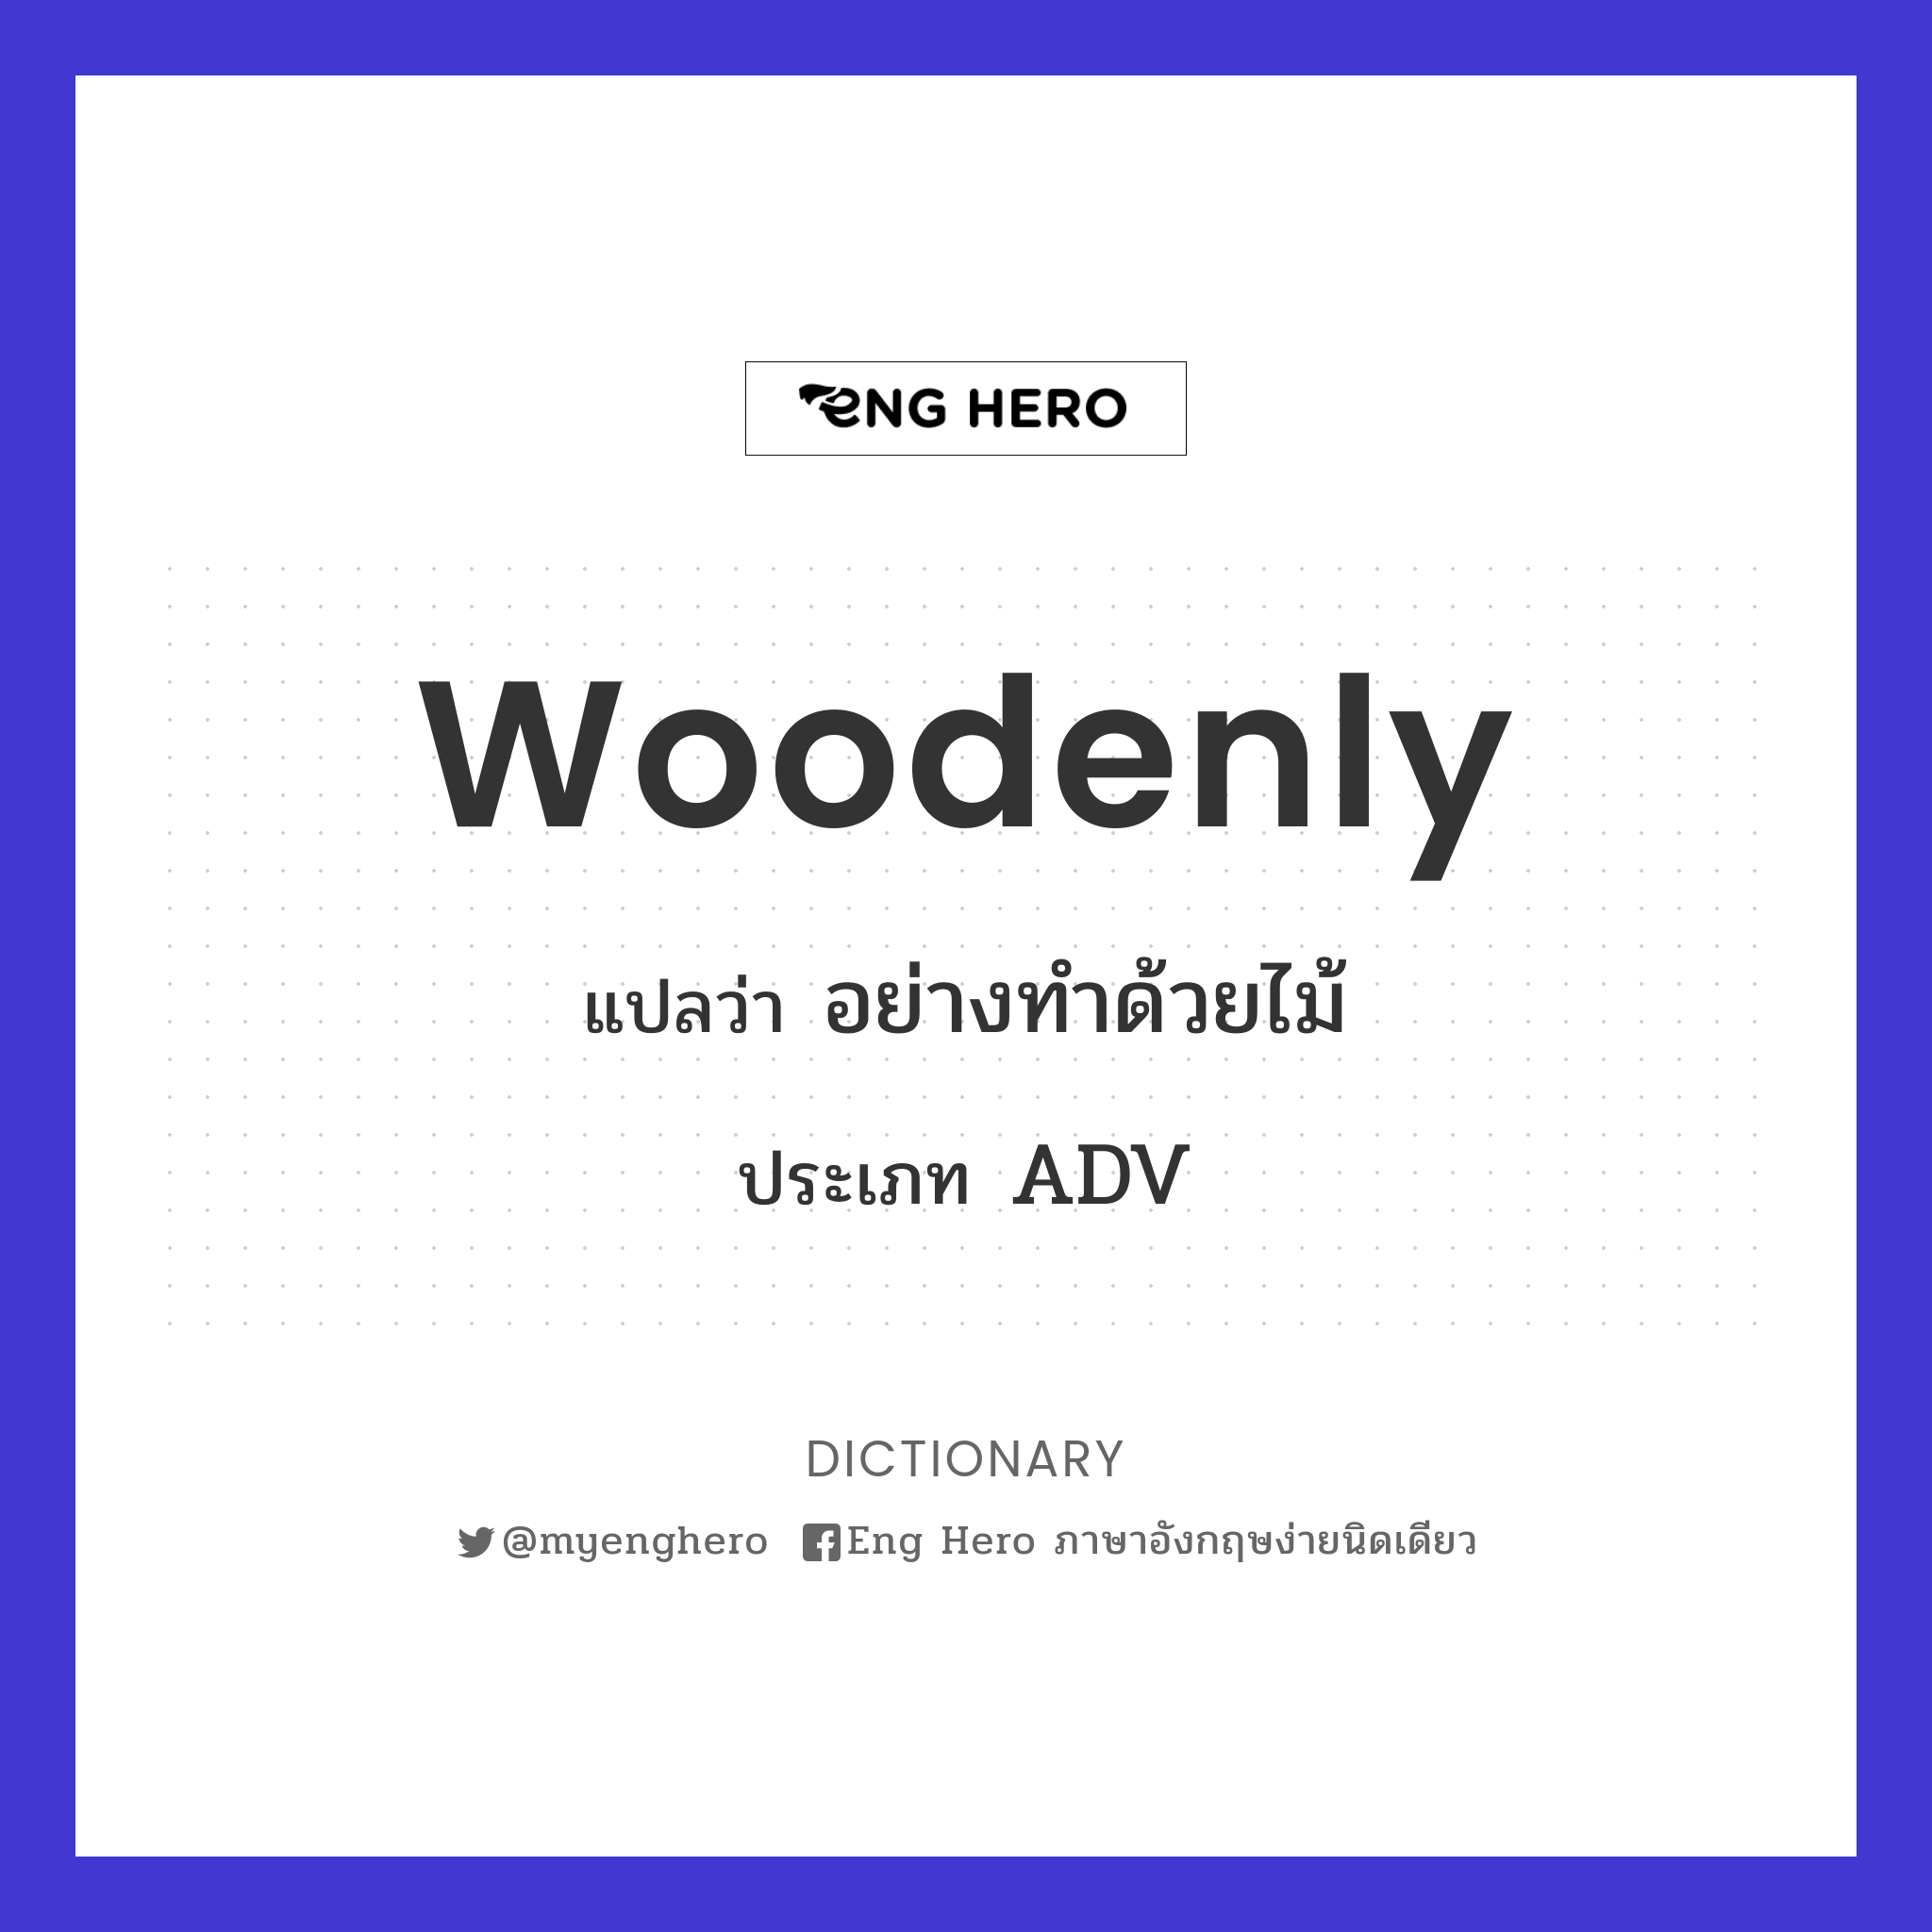 woodenly